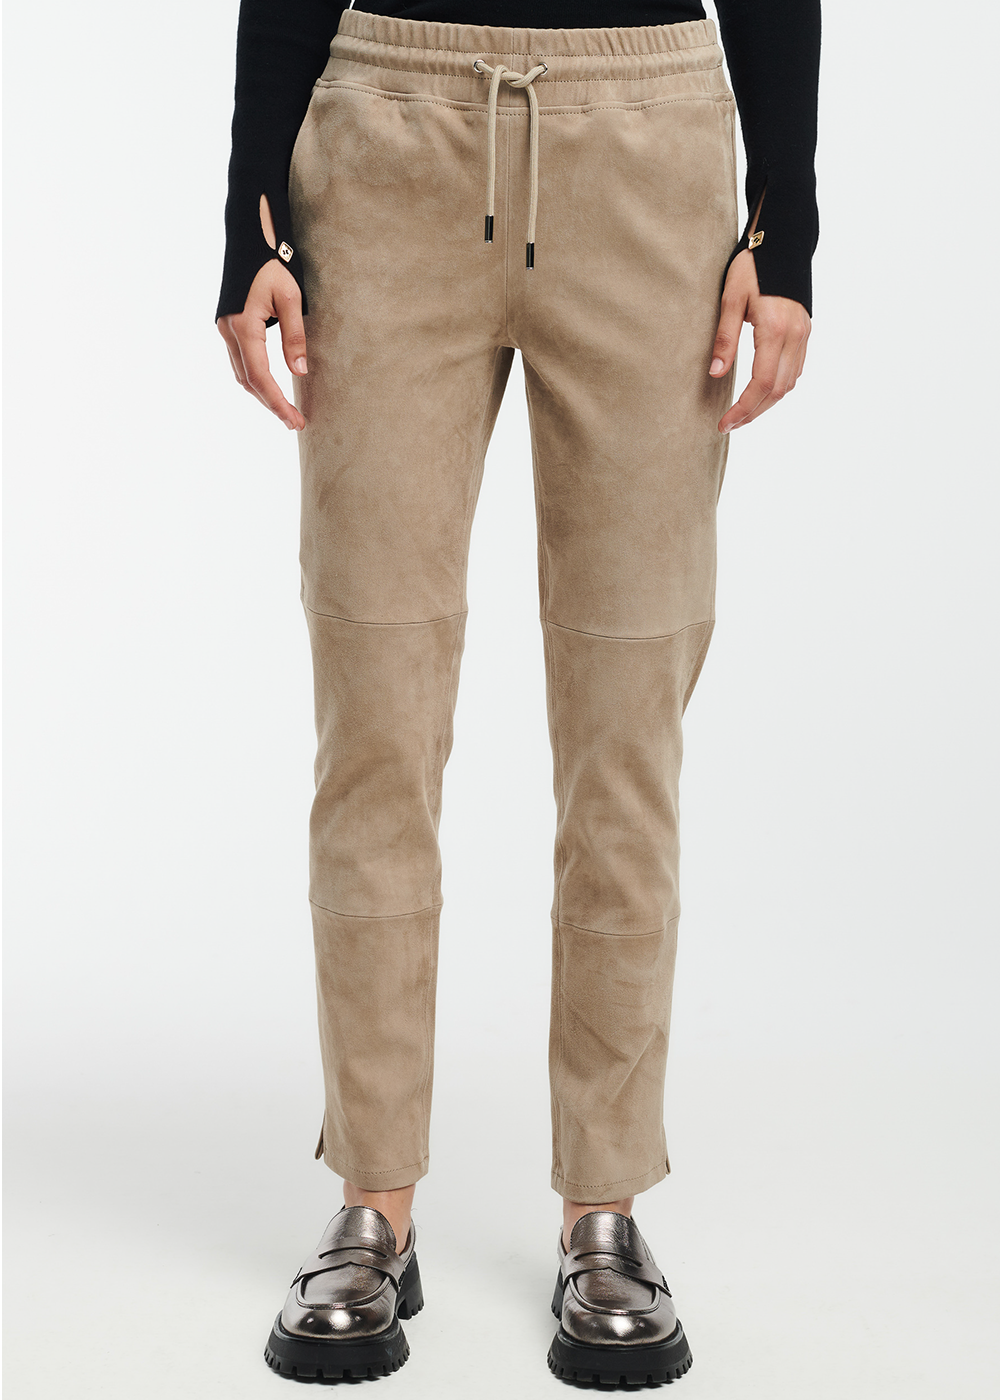 NAOMI Slim Fit Suede Trousers